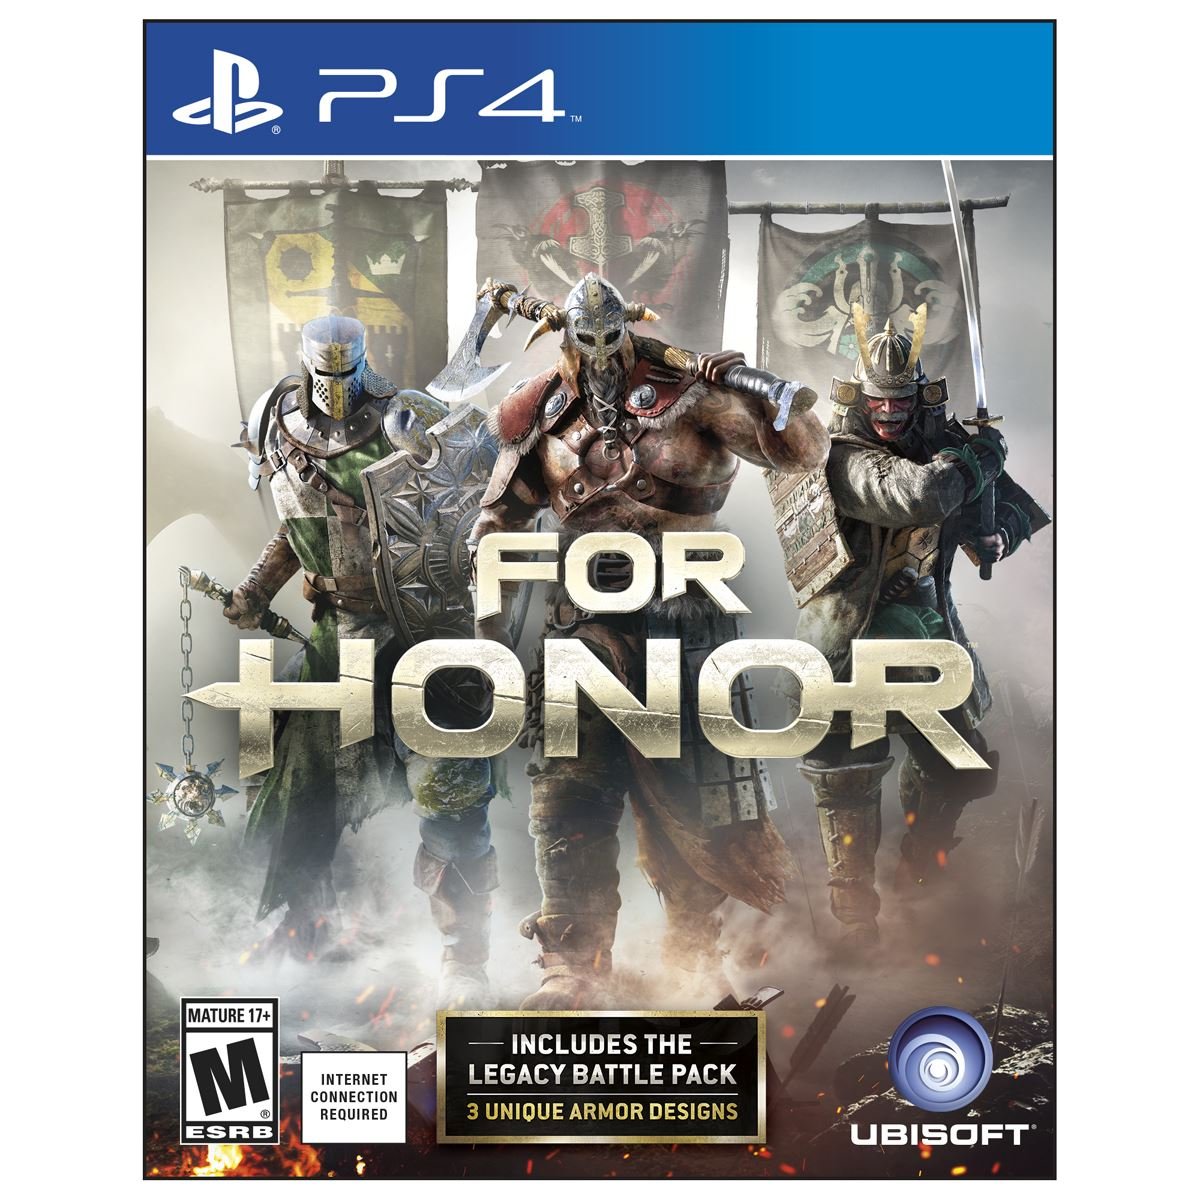 PS4 For Honor